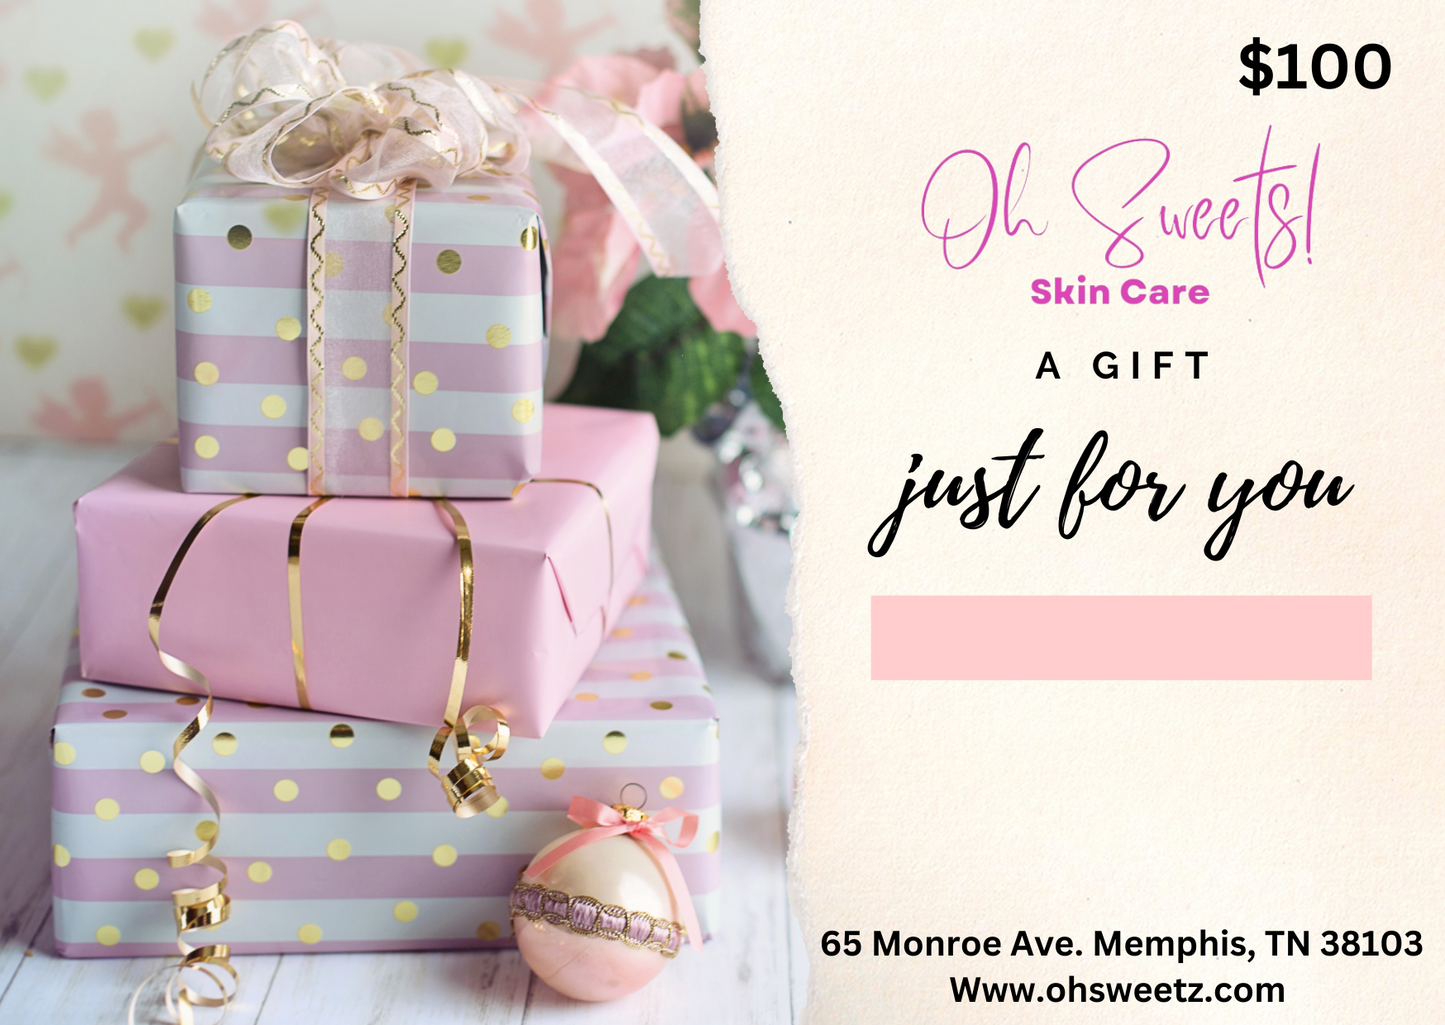 Oh Sweets! Skin Care Gift Card